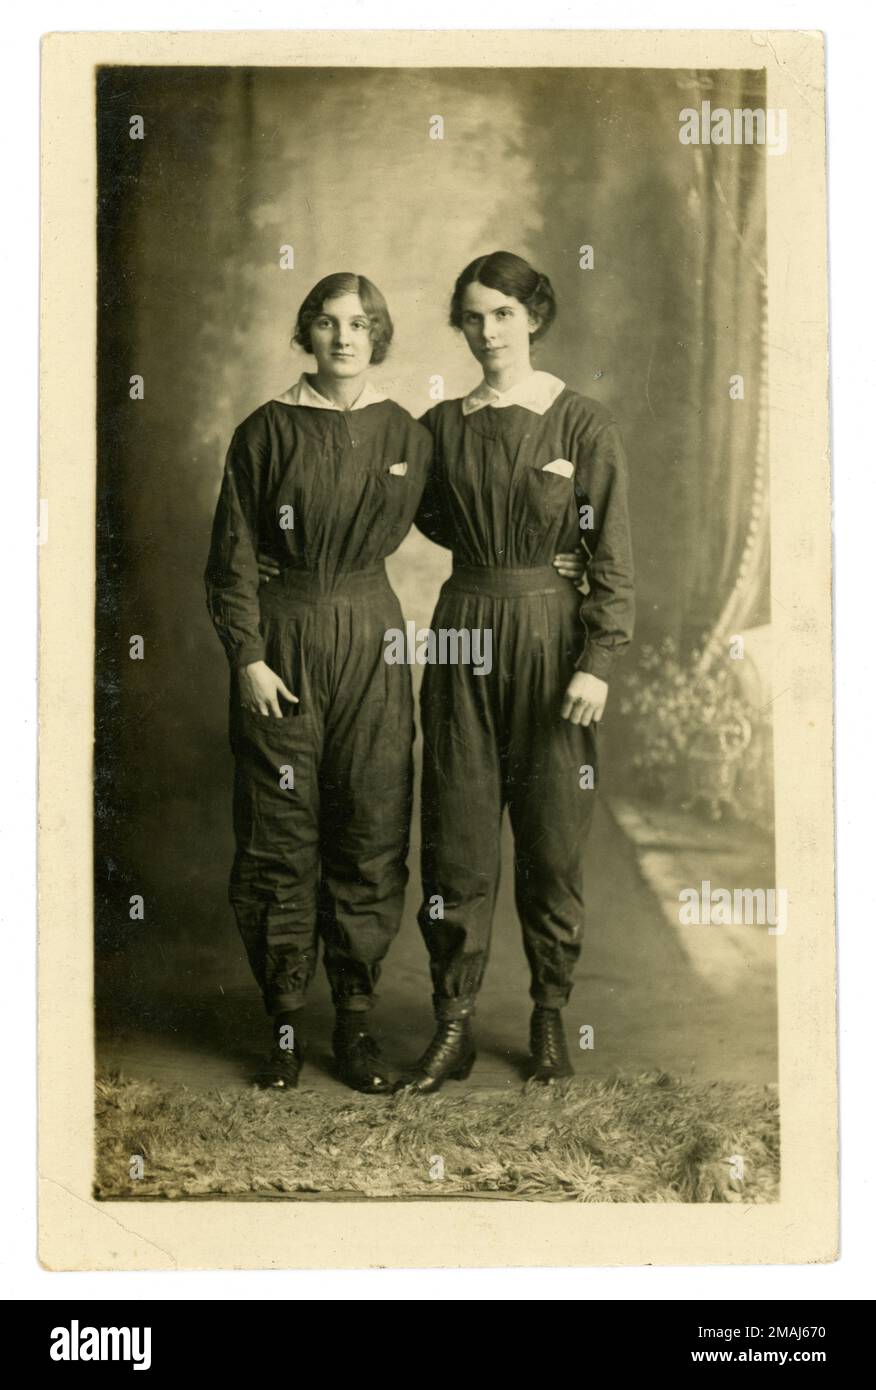 Original WW1 era portrait of 2 young emancipated women proudly  wearing boiler suits, showing comradeship of women working in the munitions industry. The girls are thought to be munitions workers as they are wearing boiler suits - it was a dangerous job where skirts might catch in machinery or knock over dangerous chemicals. The town of Wakefield sent girls to work at the National Filling Factory No. 1, at nearby Barnbow. Women working at this large munitions factory were known as 'Barnbow lasses'. The portrait was taken at Barnes' Black & White Studios, Kirkgate, Wakefield, circa 1916. U.K. Stock Photo